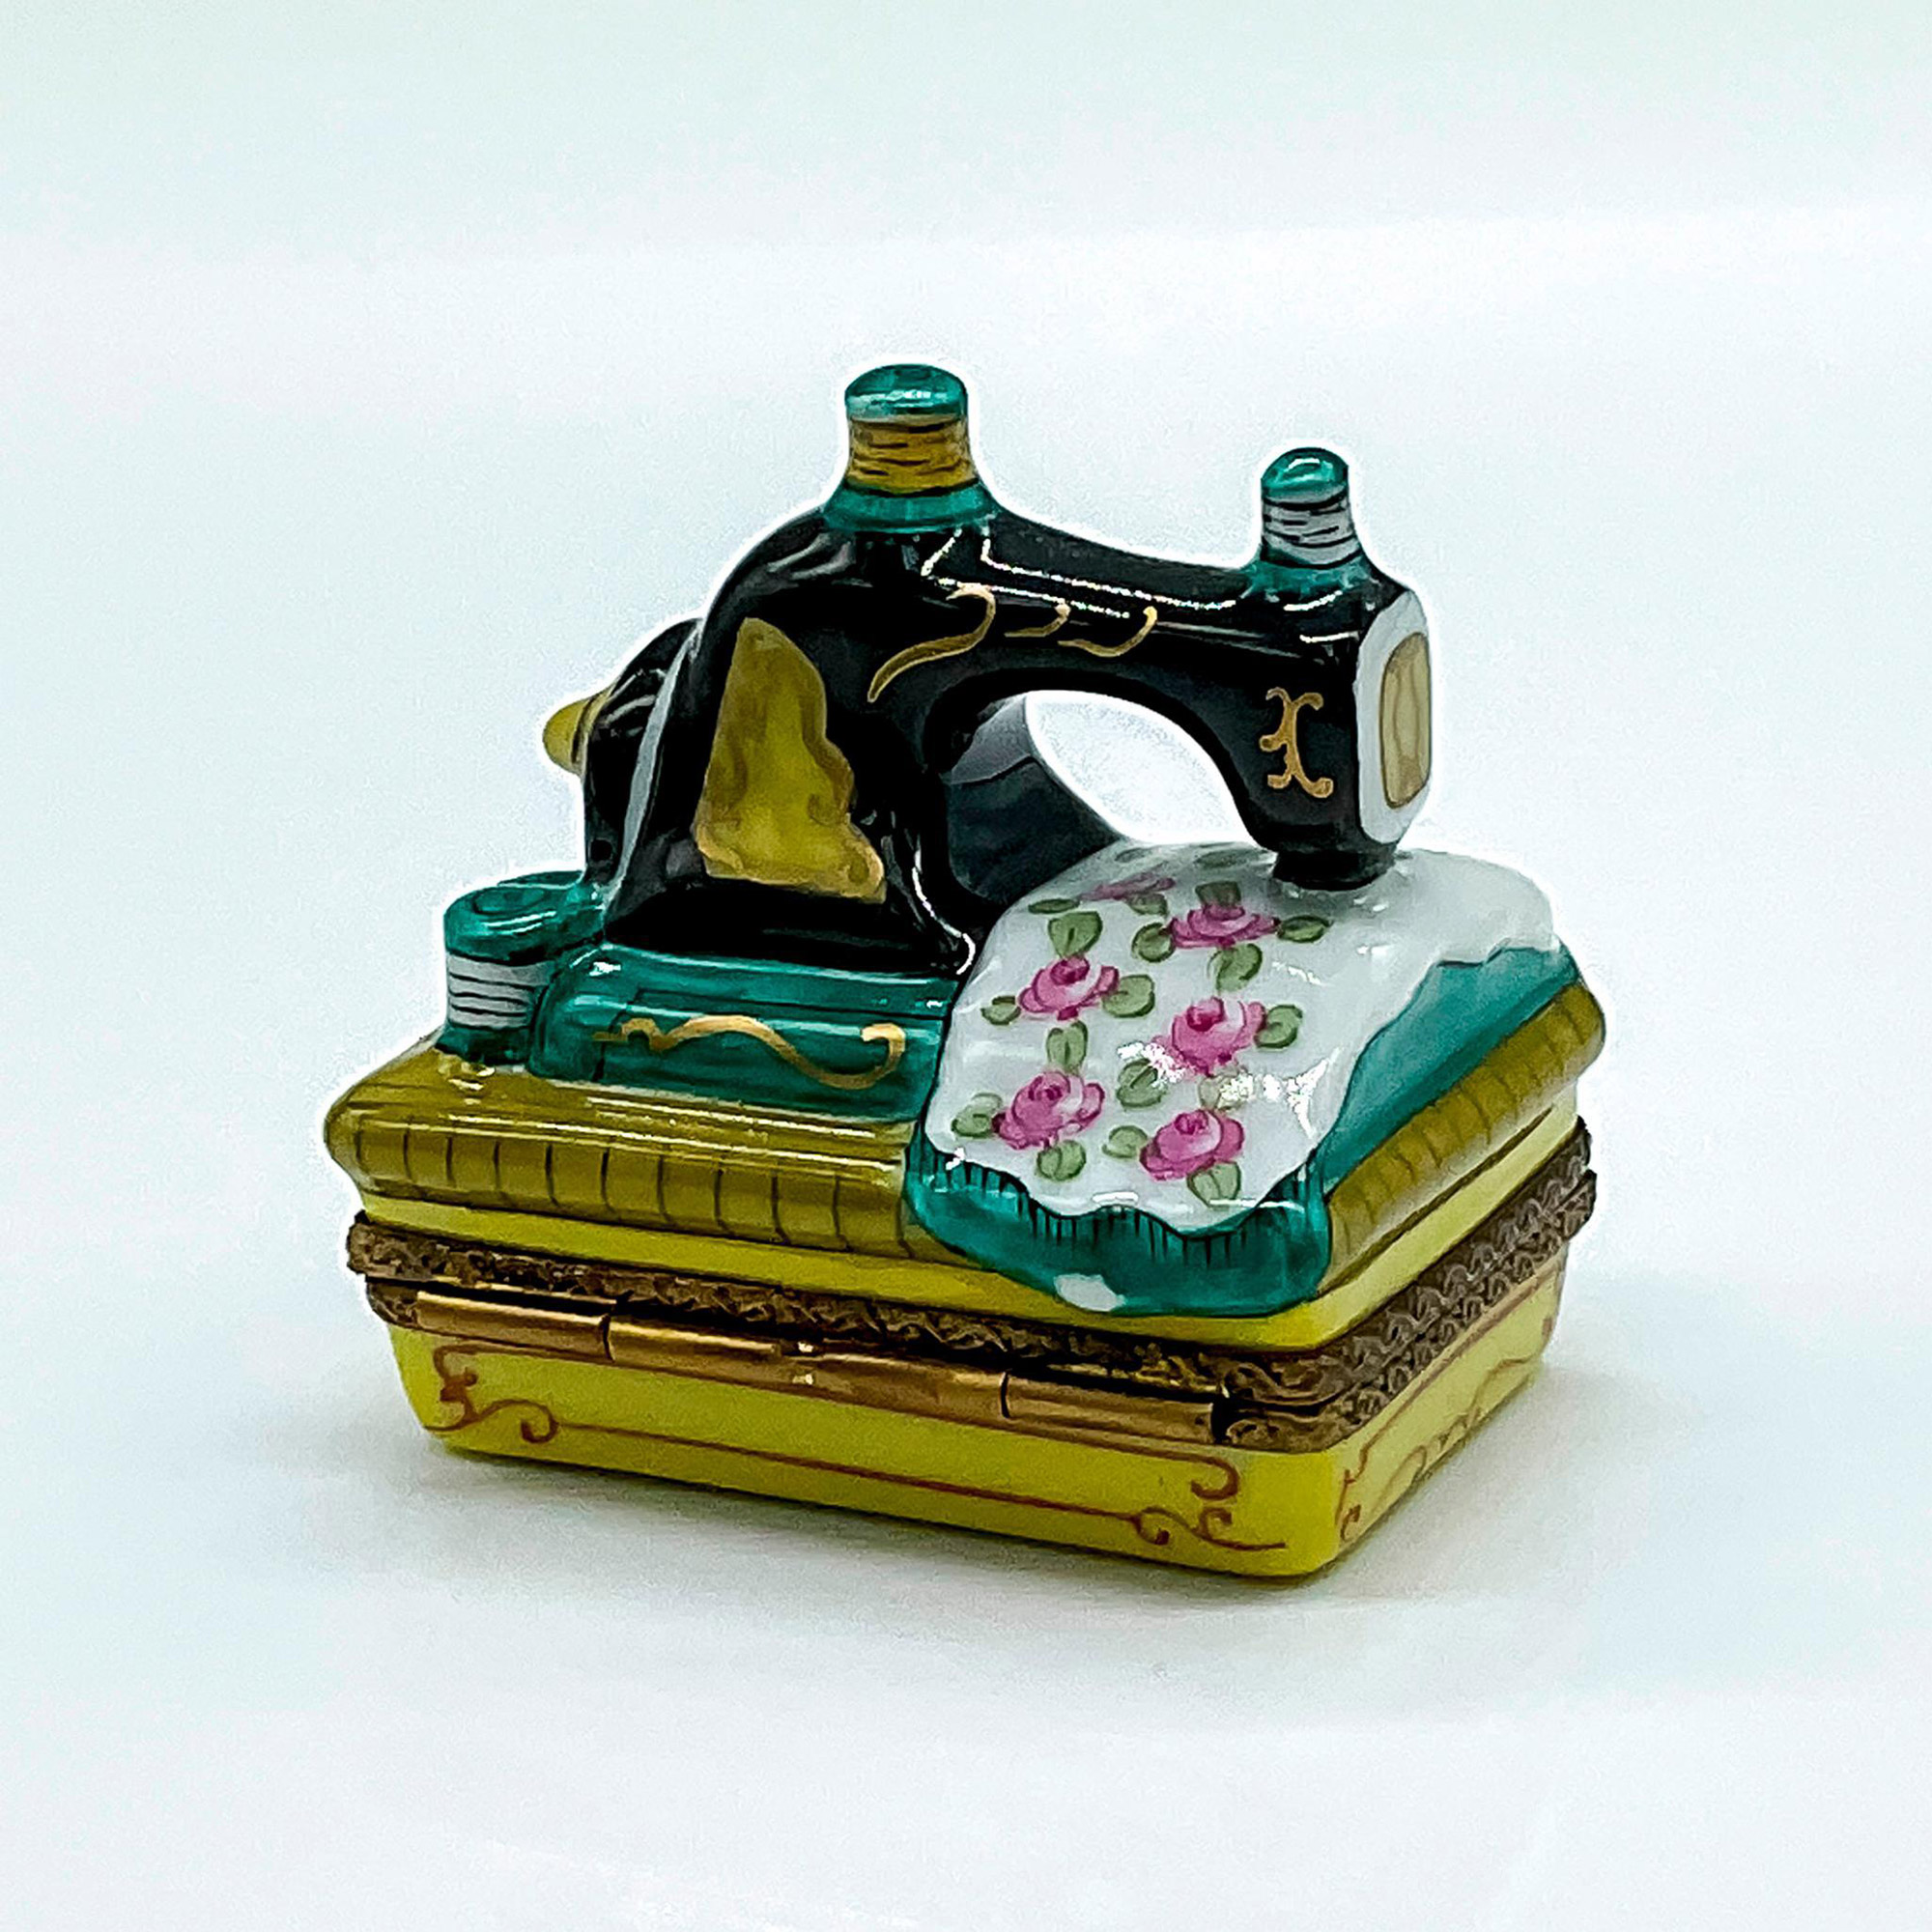 Limoges A.L. Porcelain Sewing Machine Box - Image 2 of 4